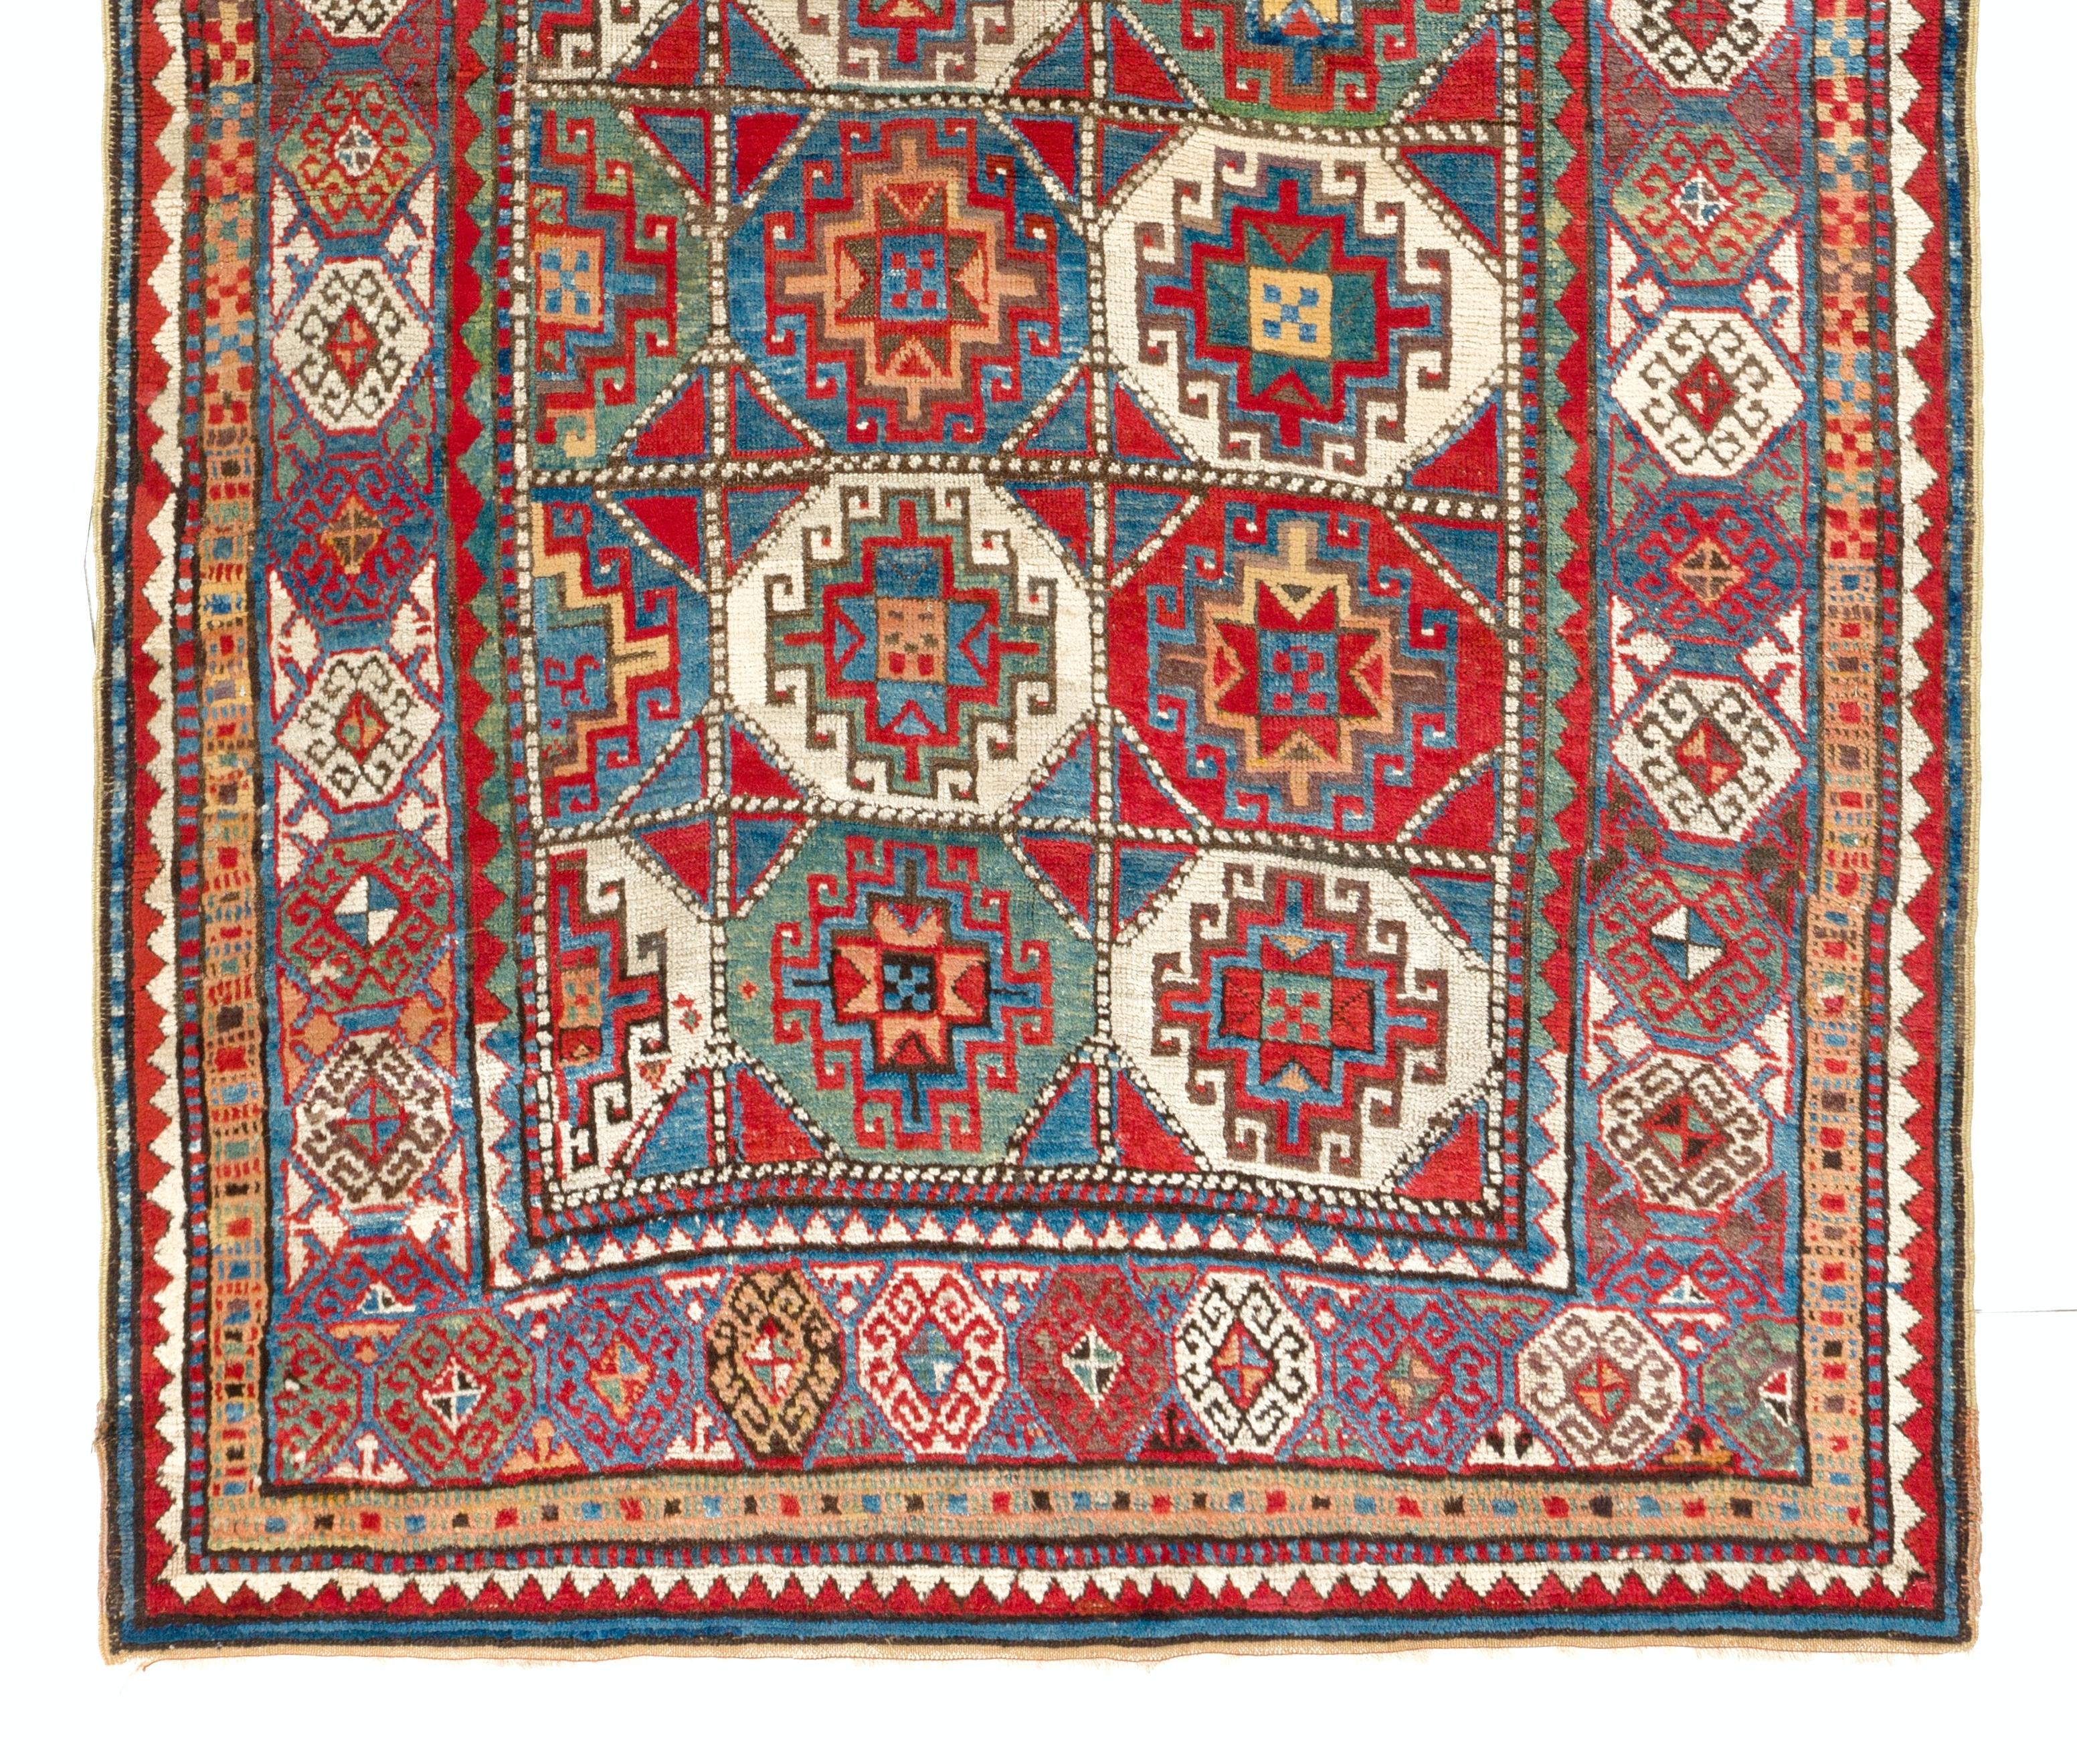 An antique Caucasian Moghan Kazak rug made of soft vegetal dyed lamb's wool. The rug is in very good condition with even medium pile. 
Size: 4.8 x 6.8 Ft.